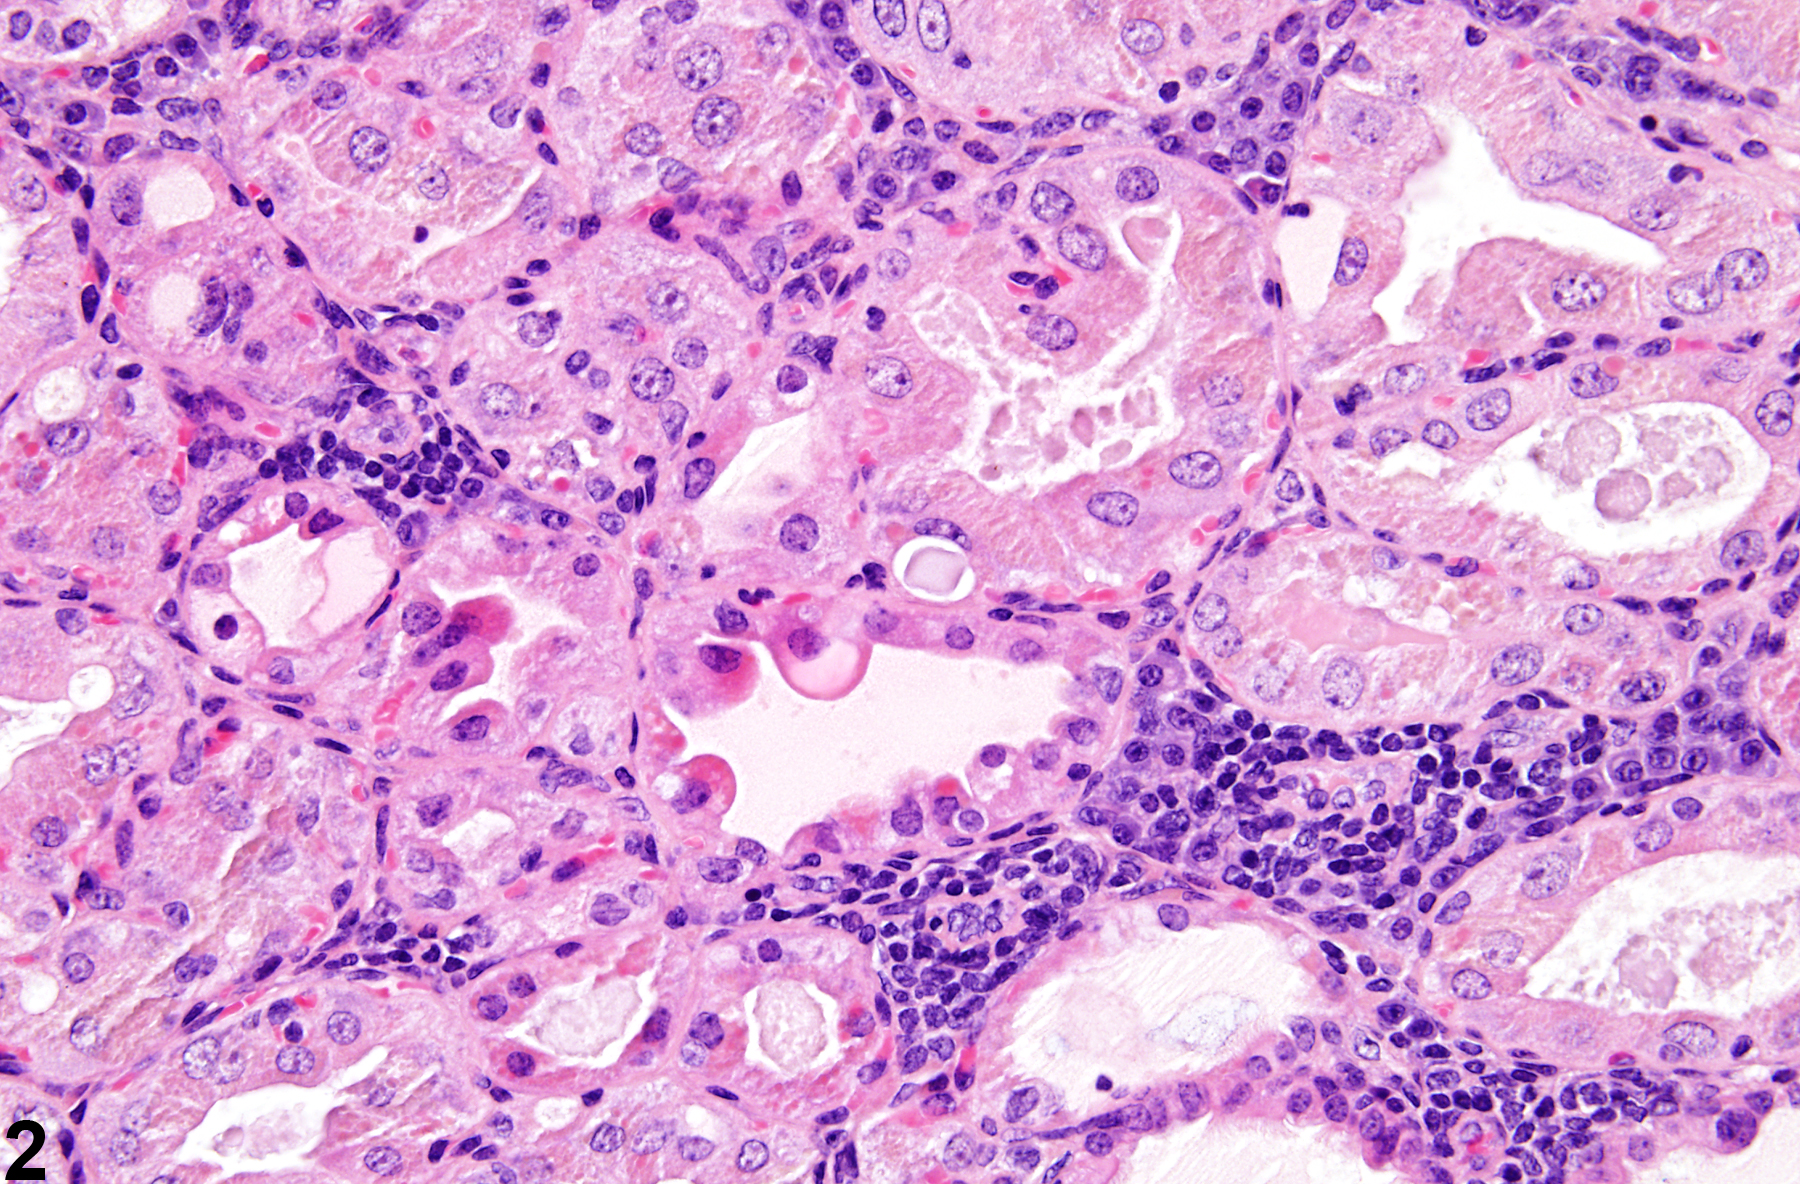 Image of inflammation in the thyroid gland from a female Tg.AC (FVB/N) mouse in a chronic study